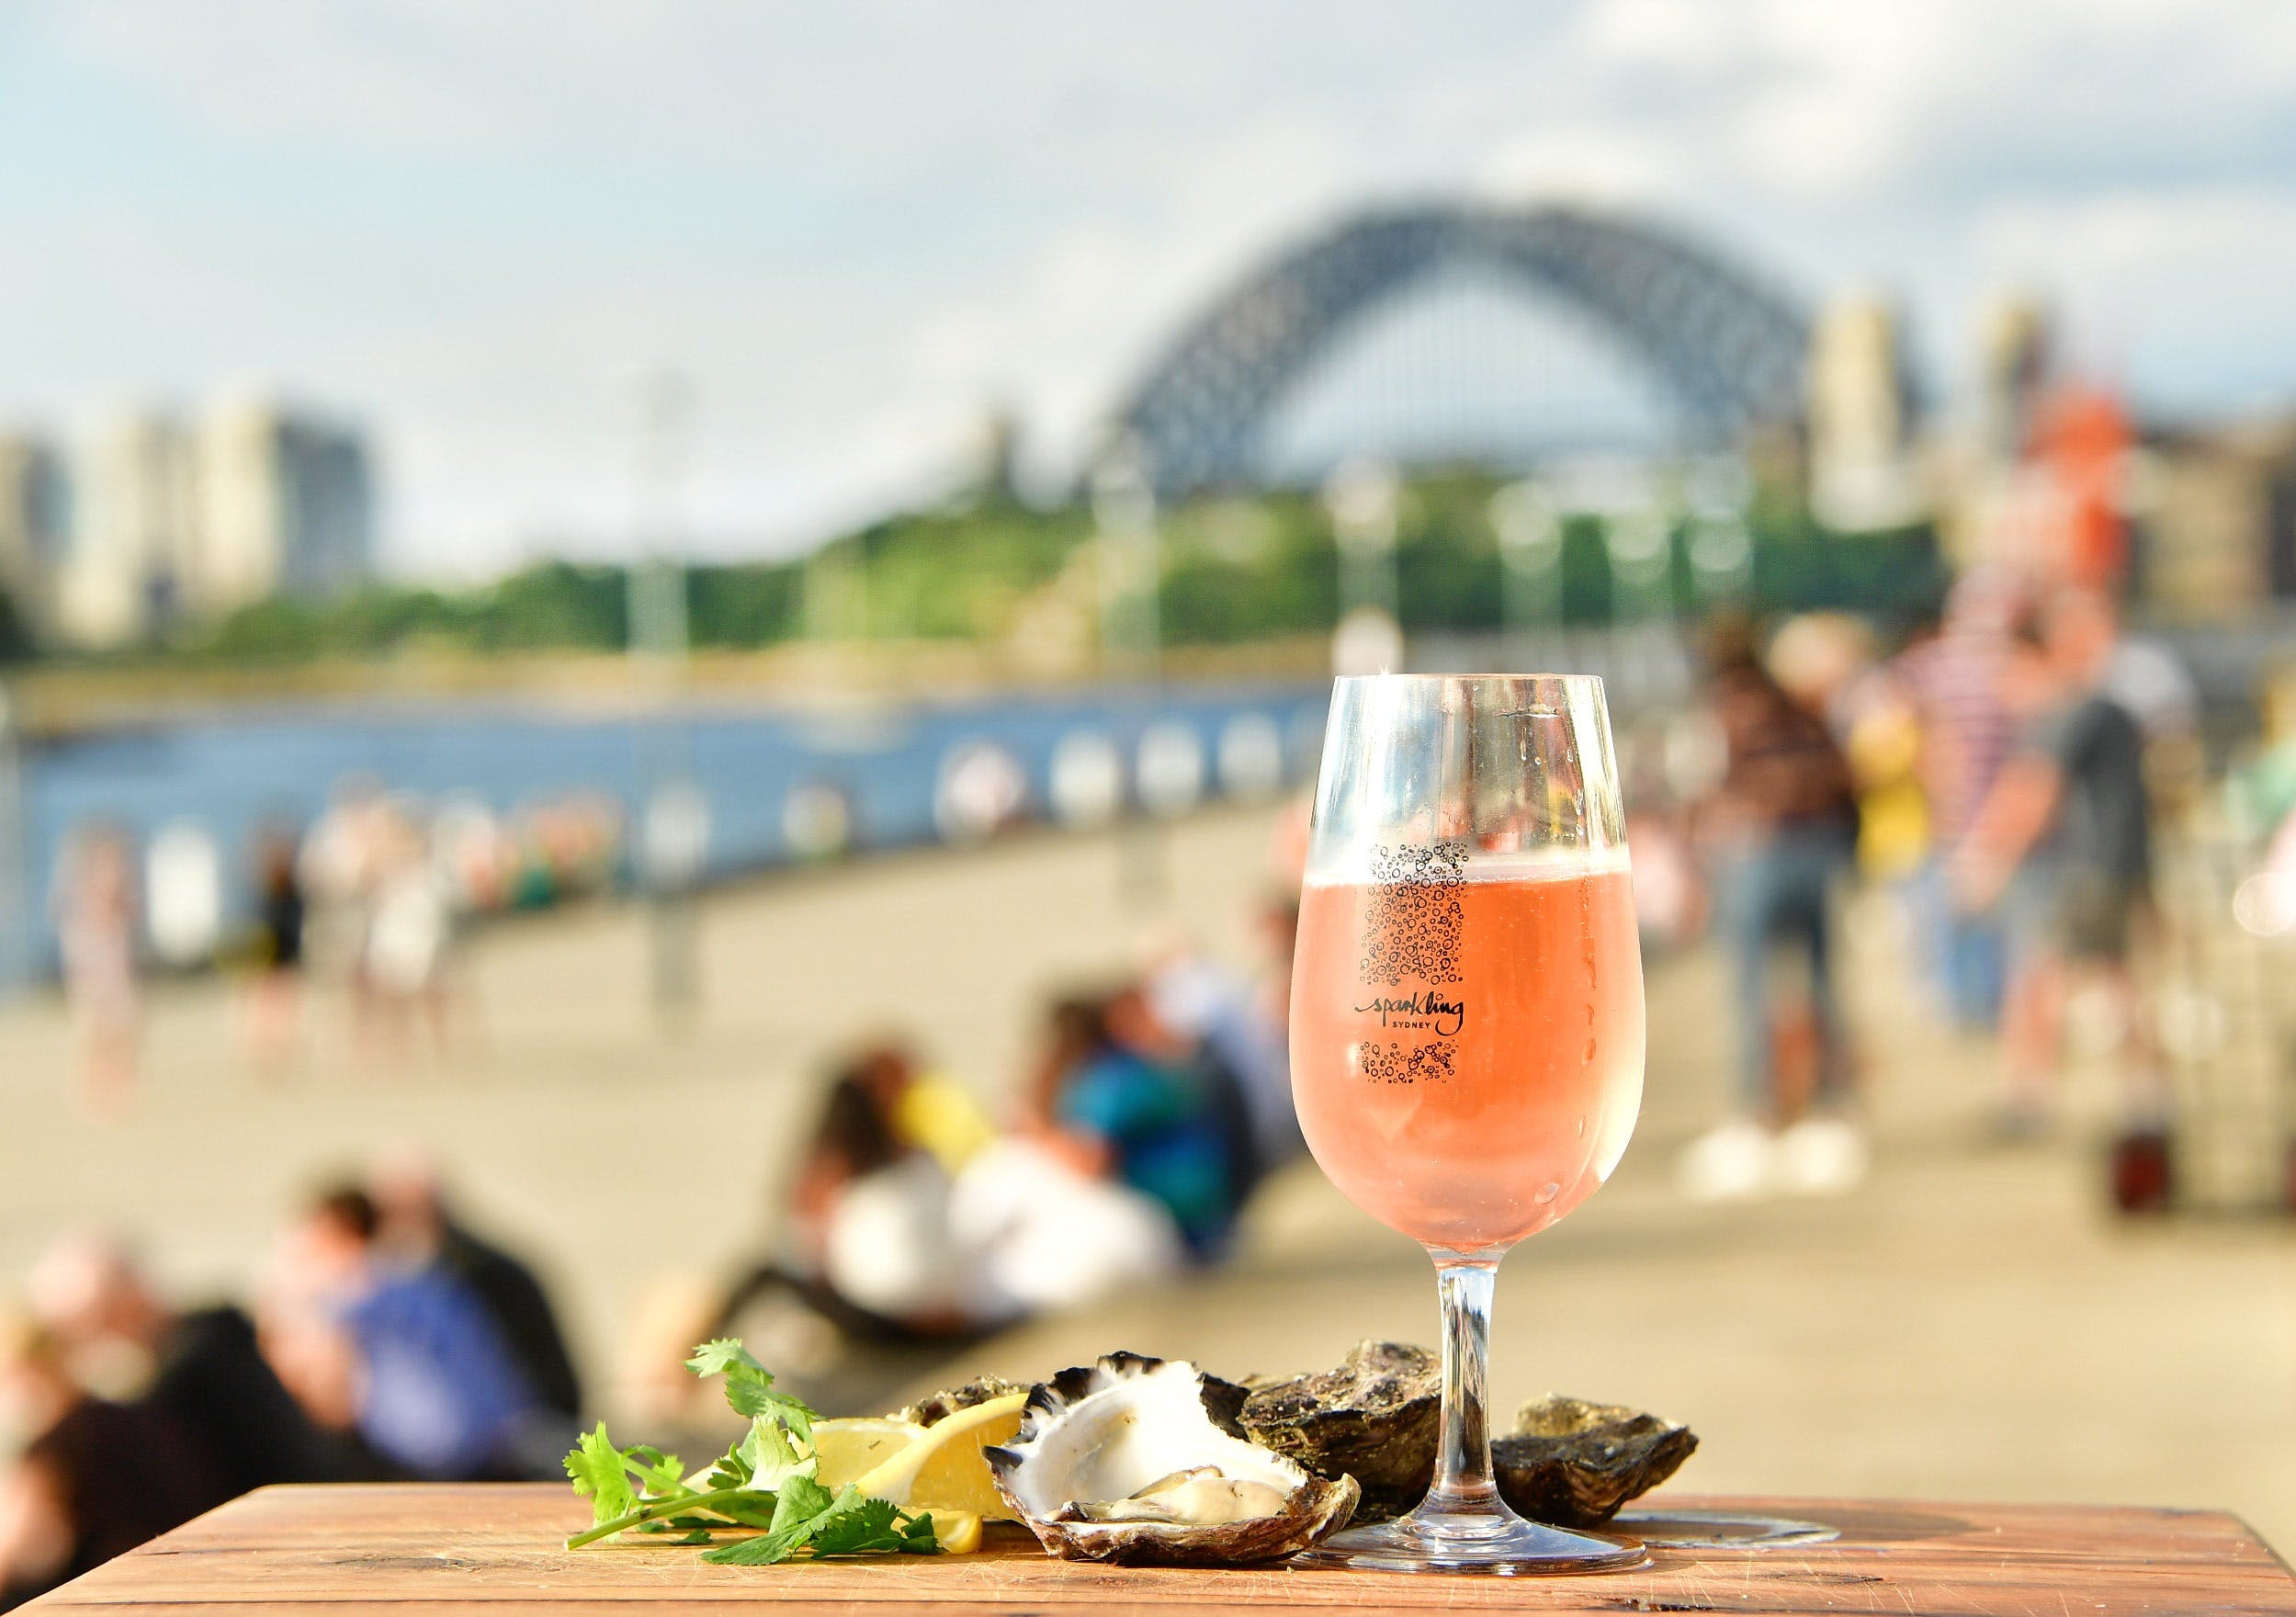 Sparkling Sydney - Pubs and Clubs